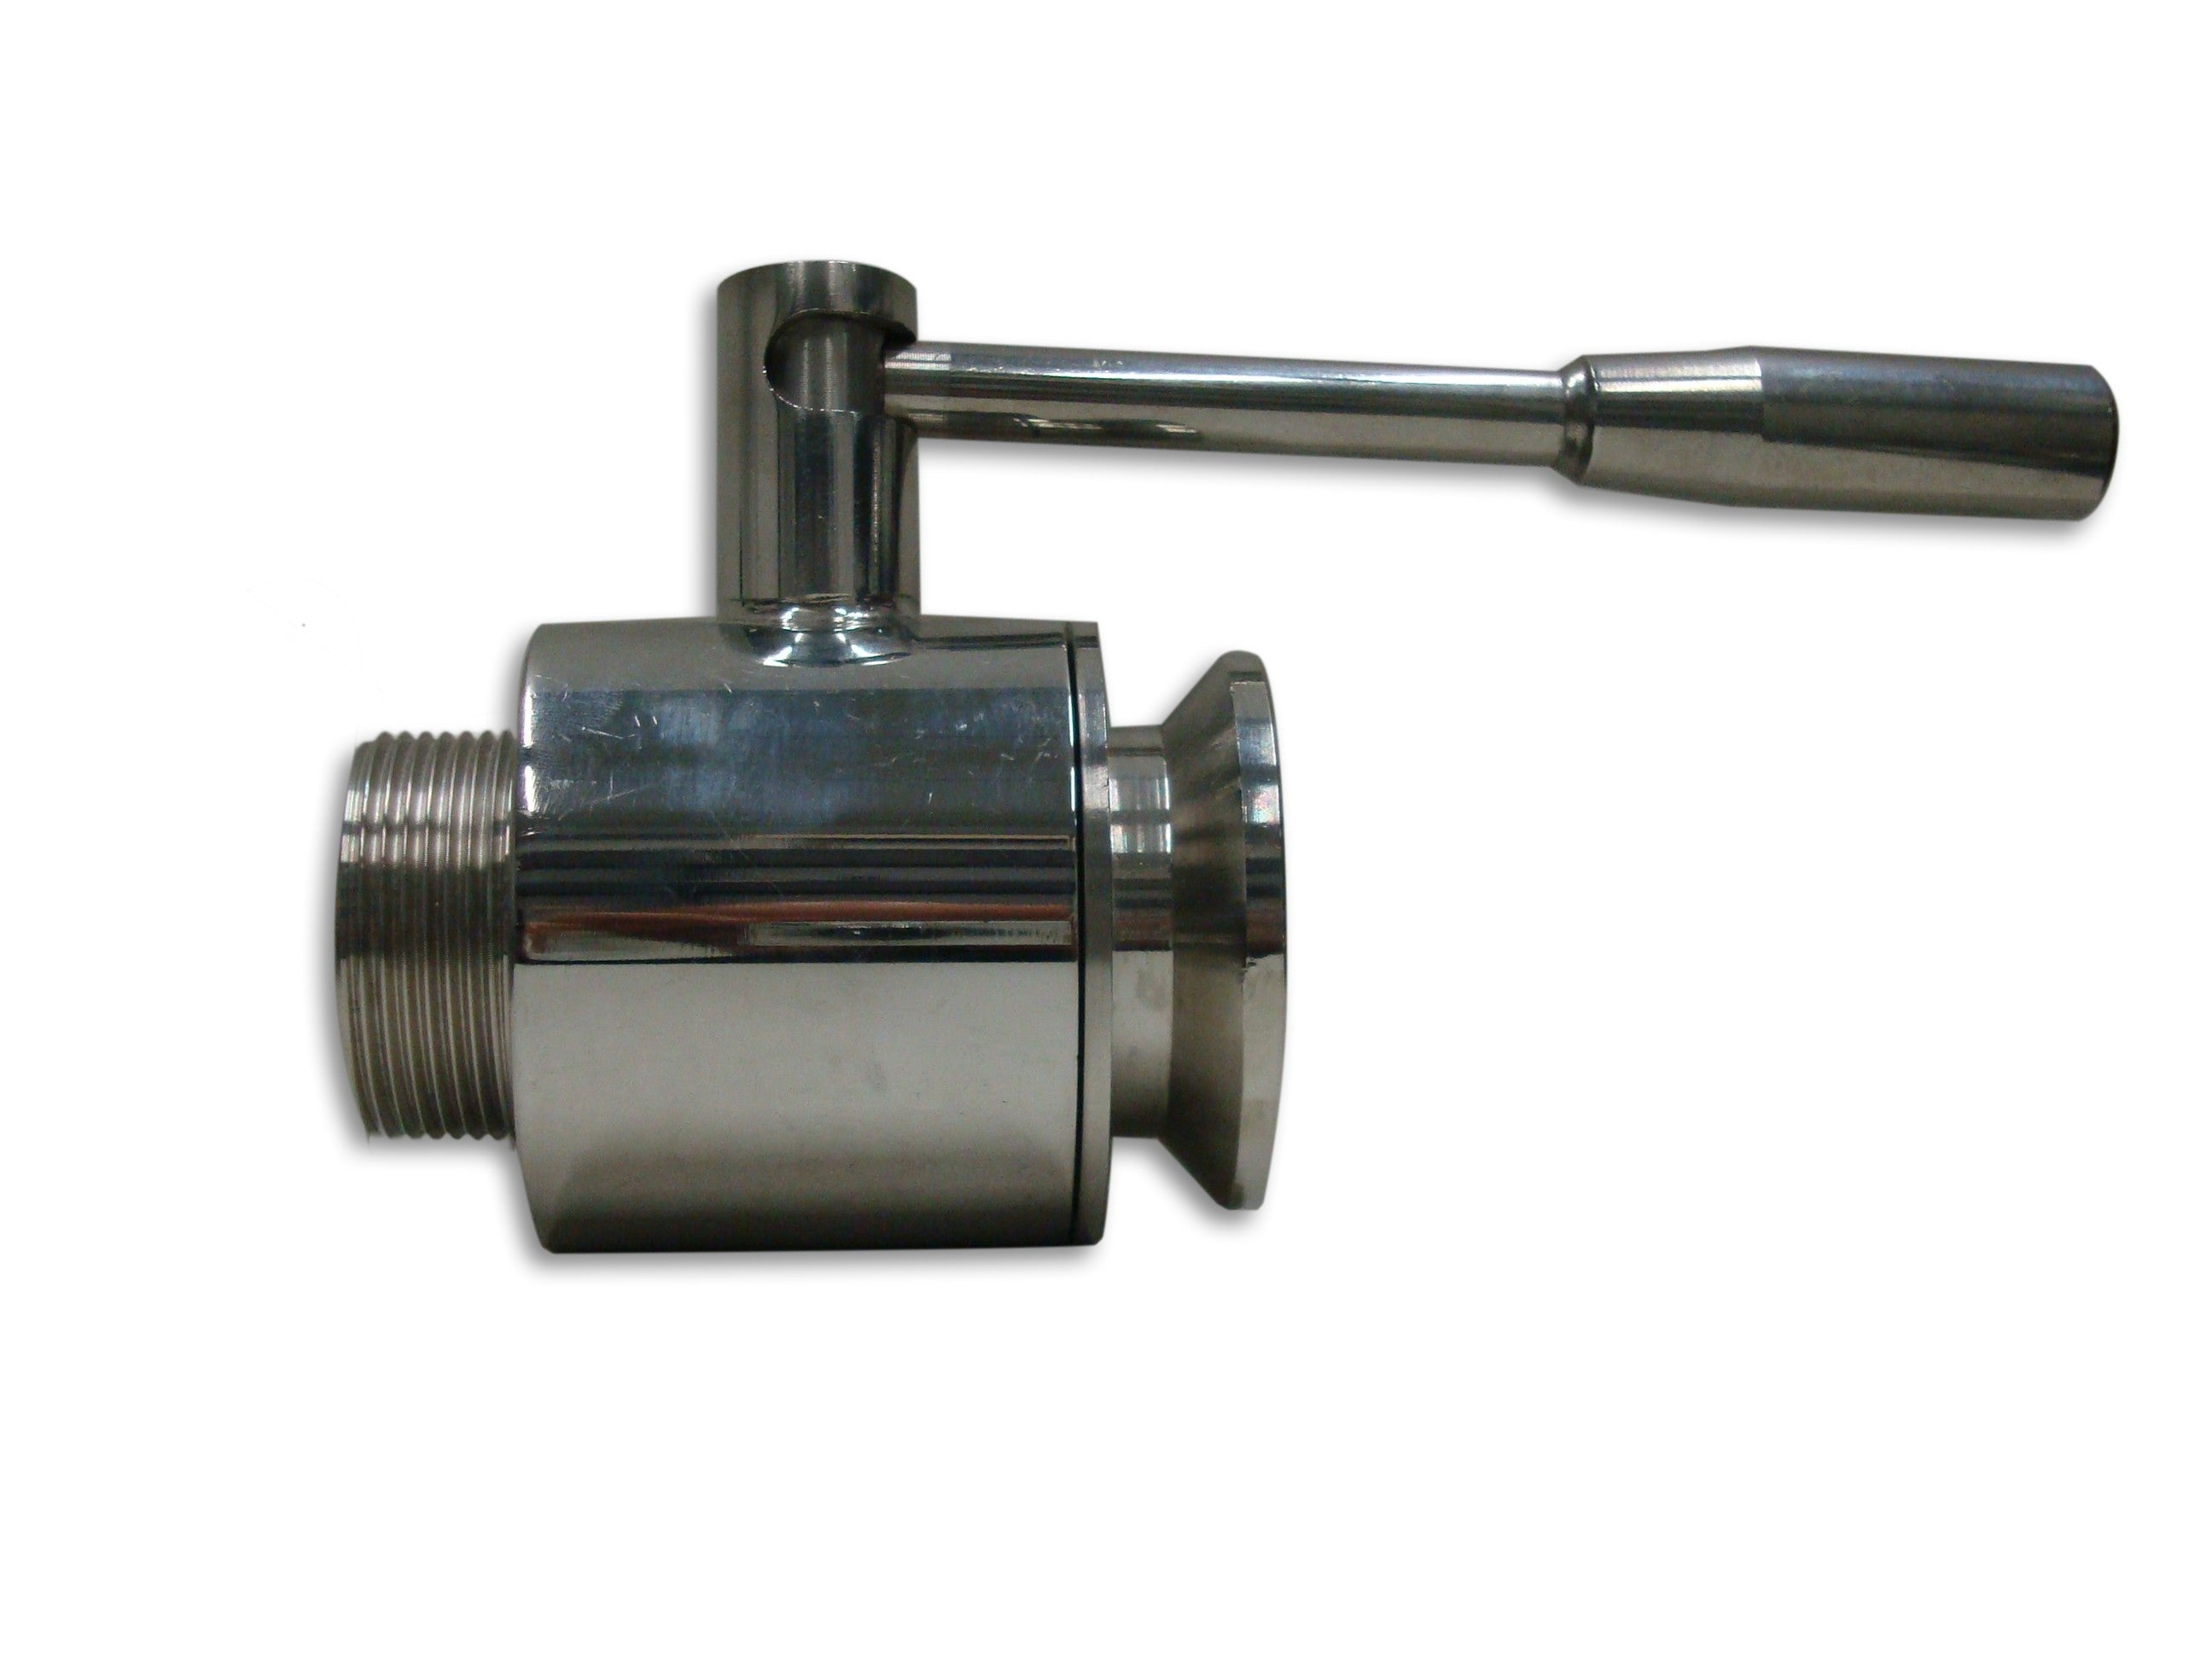 Stailess steel ball valve 1"1/4 with connection 50 garolla.